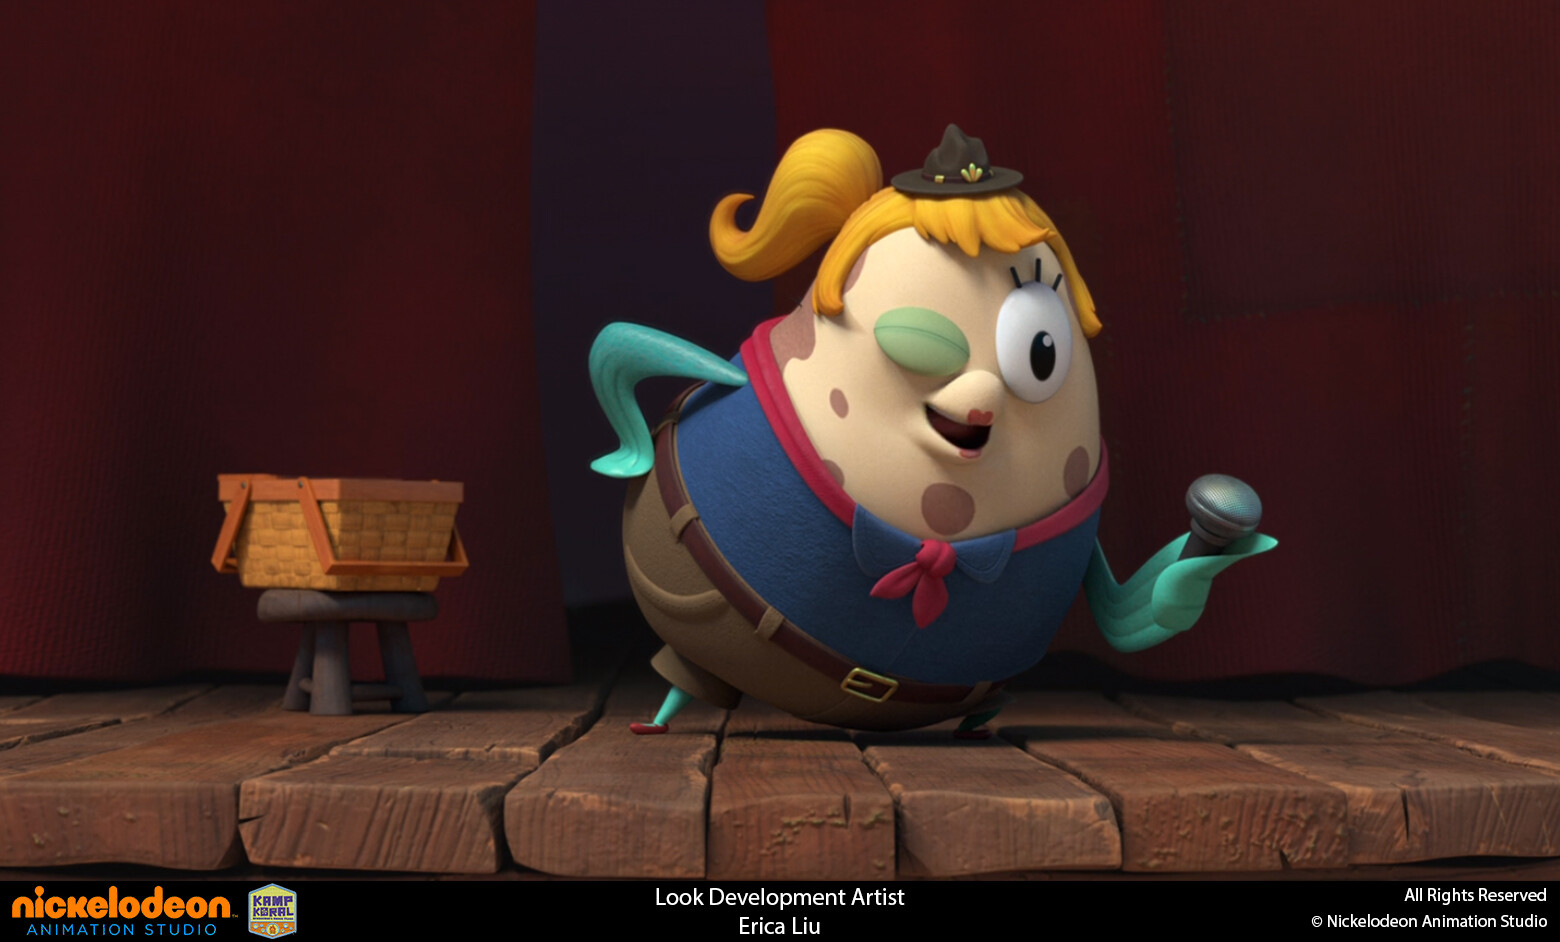 Responsible for look development and texture of Mrs. Puff